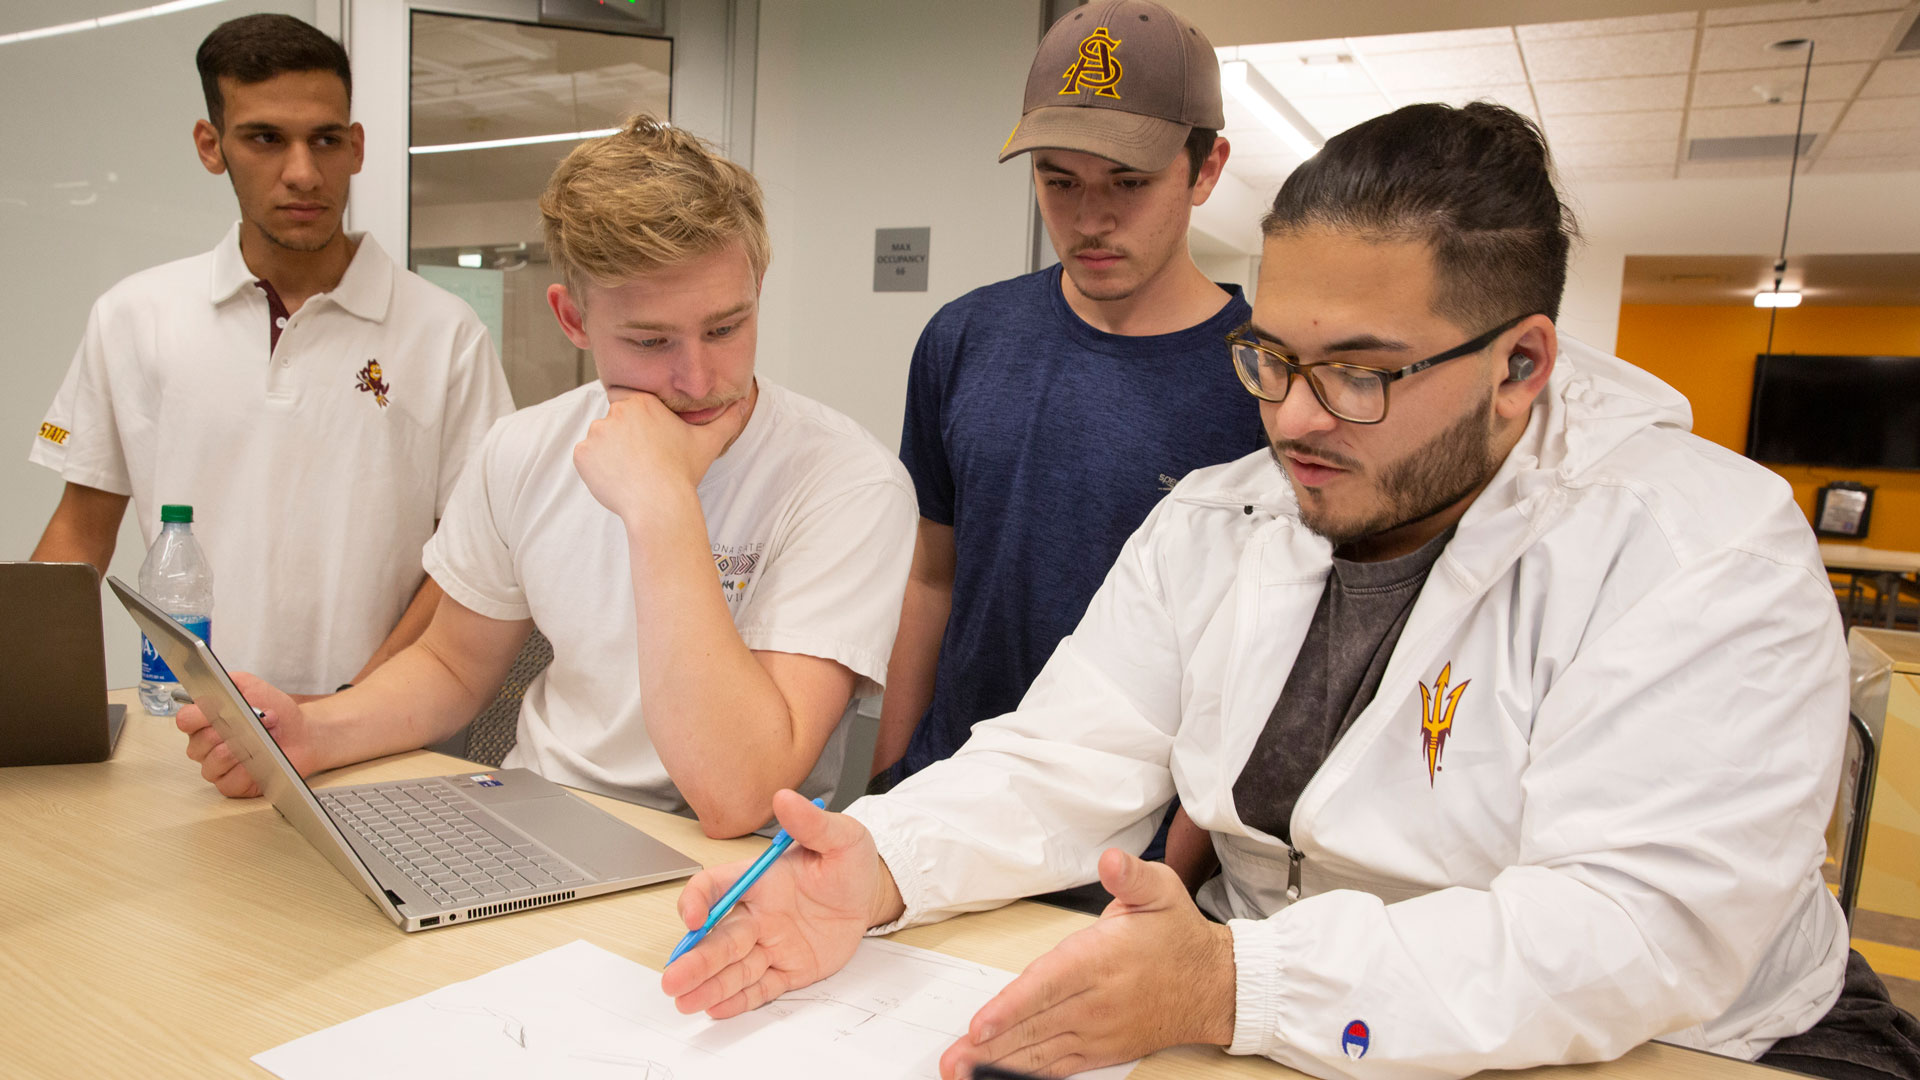 Mateo Oliveras, the incoming president of Solar Devils, works with Rashid Alwashahi, Ronan Gessner and James Nolan at a club meeting.